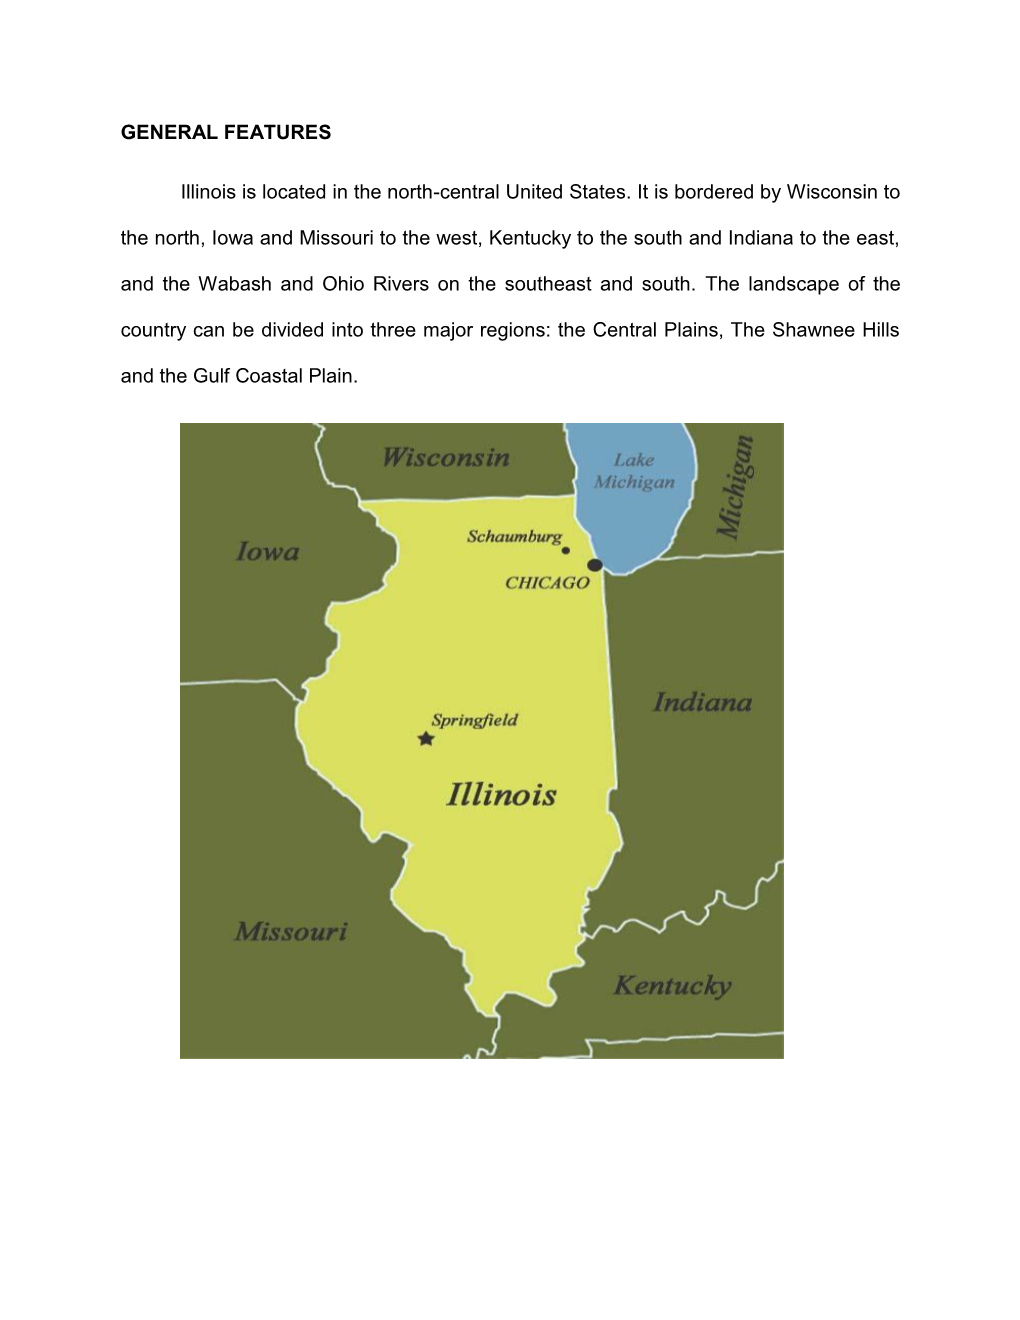 GENERAL FEATURES Illinois Is Located in the North-Central United